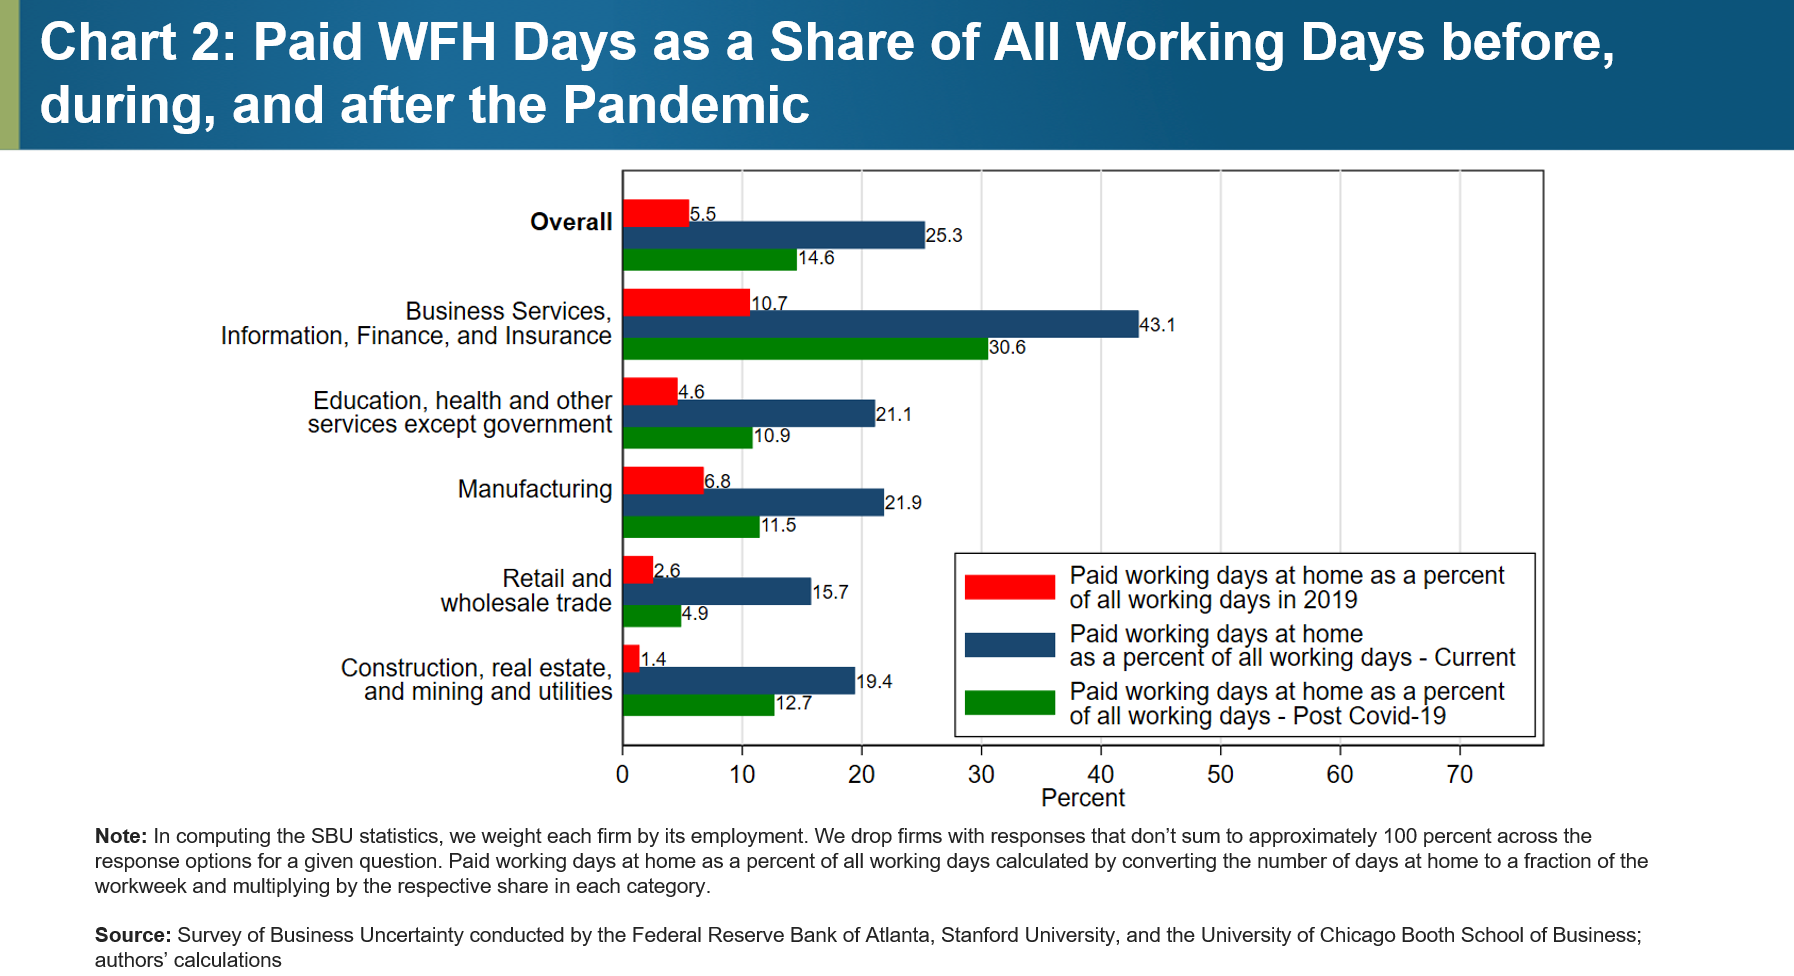 Chart 2: Paid WFH Days as a Share of All Working Days before, during, and after the Pandemic